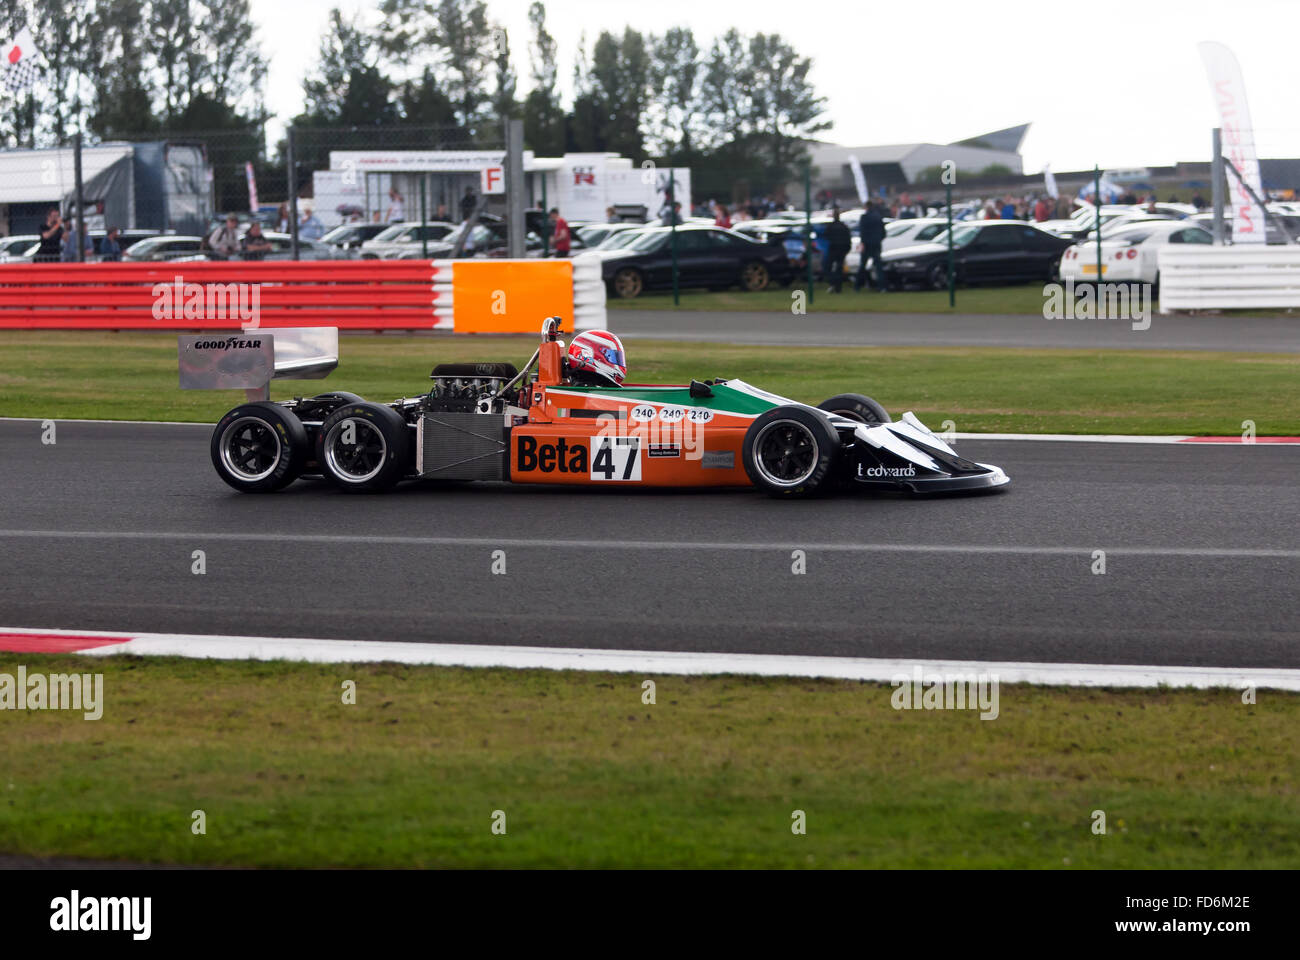 A March 2-4-0 competing in the FIA Masters Historic Formula One Race, at the Silverstone Classic 2015 Stock Photo